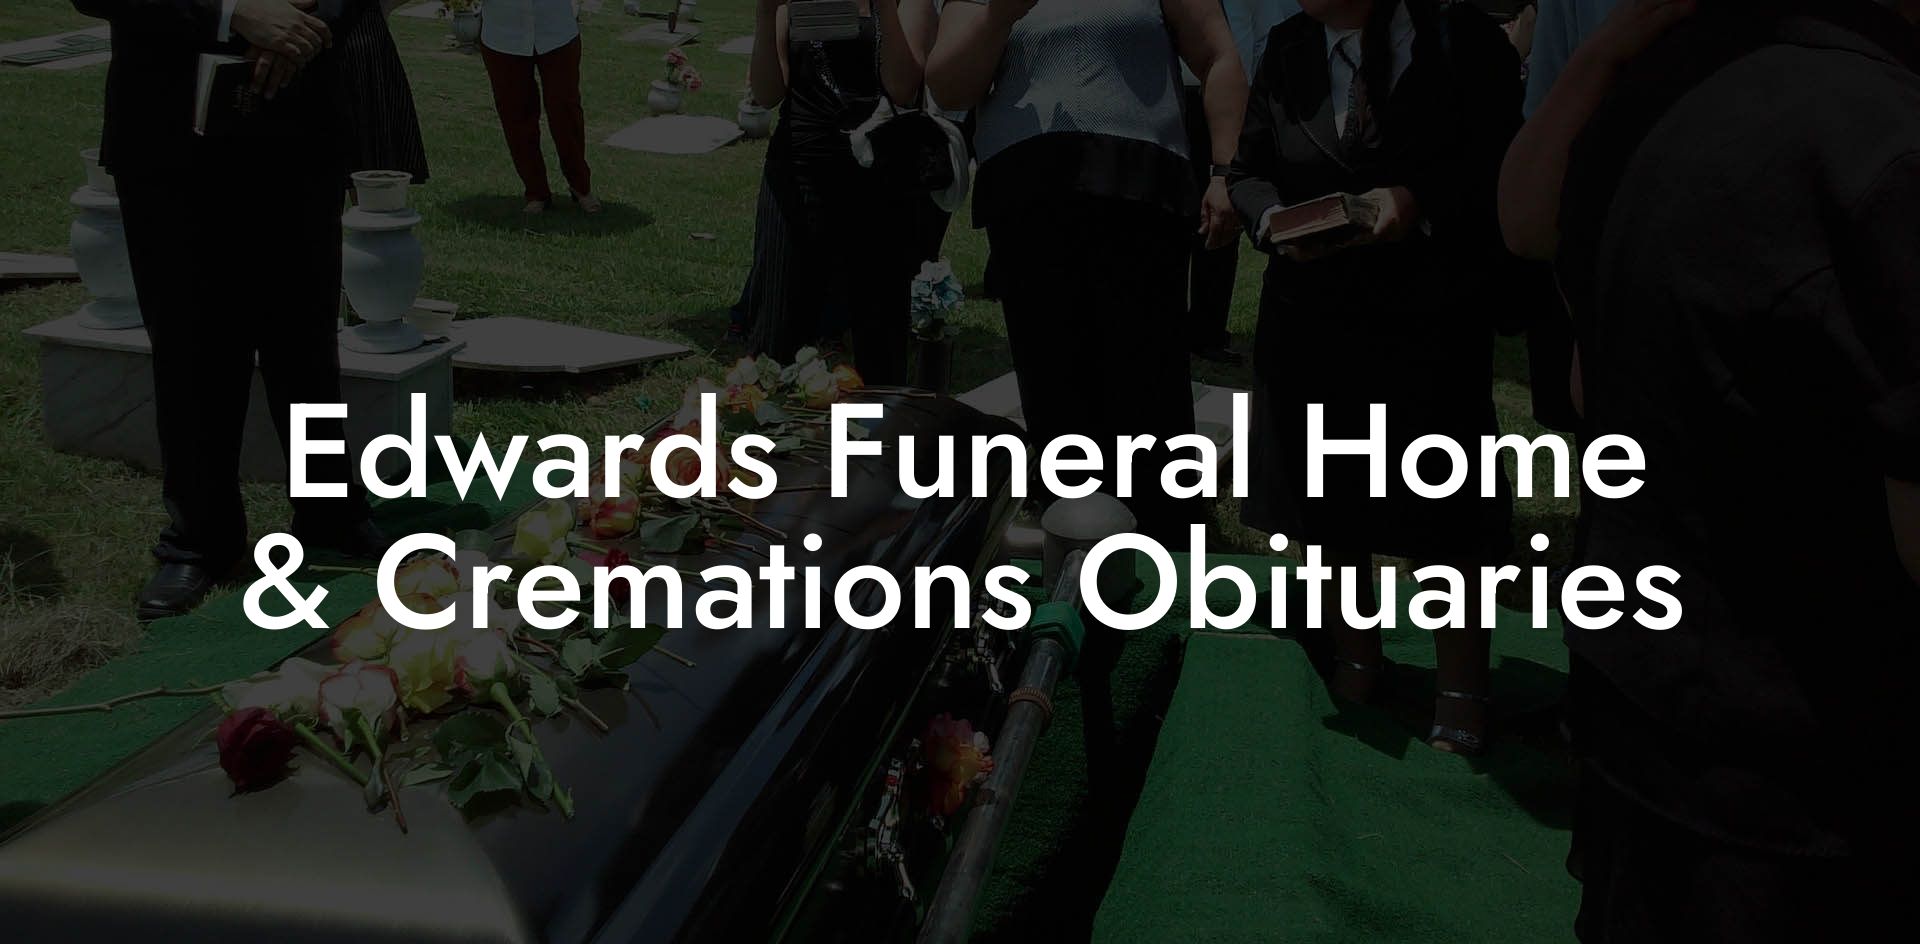 Edwards Funeral Home & Cremations Obituaries